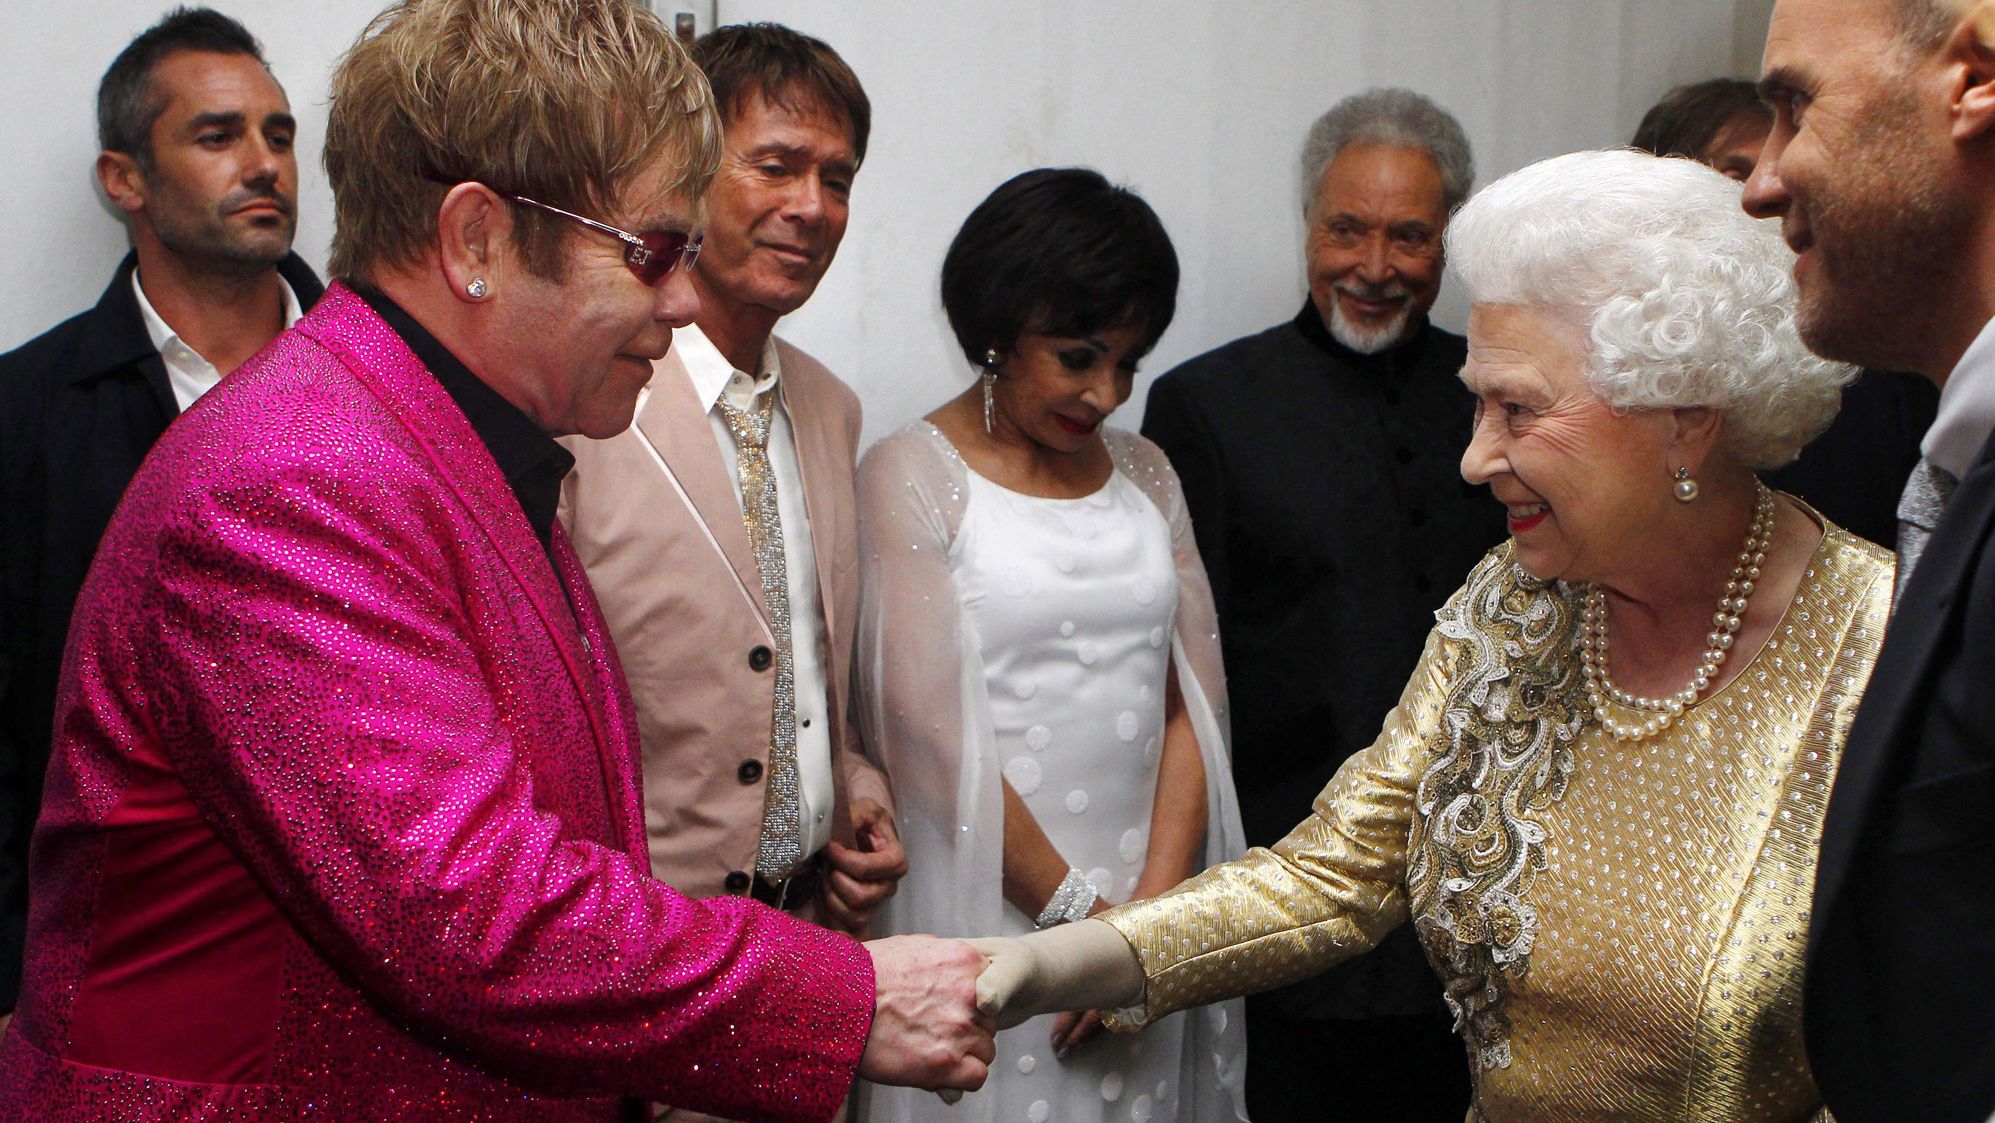 Britain's Queen Elizabeth II shakes hands with John at her Diamond Jubilee Concert in 2012. In 1998, the Queen knighted John for his music and charity work.